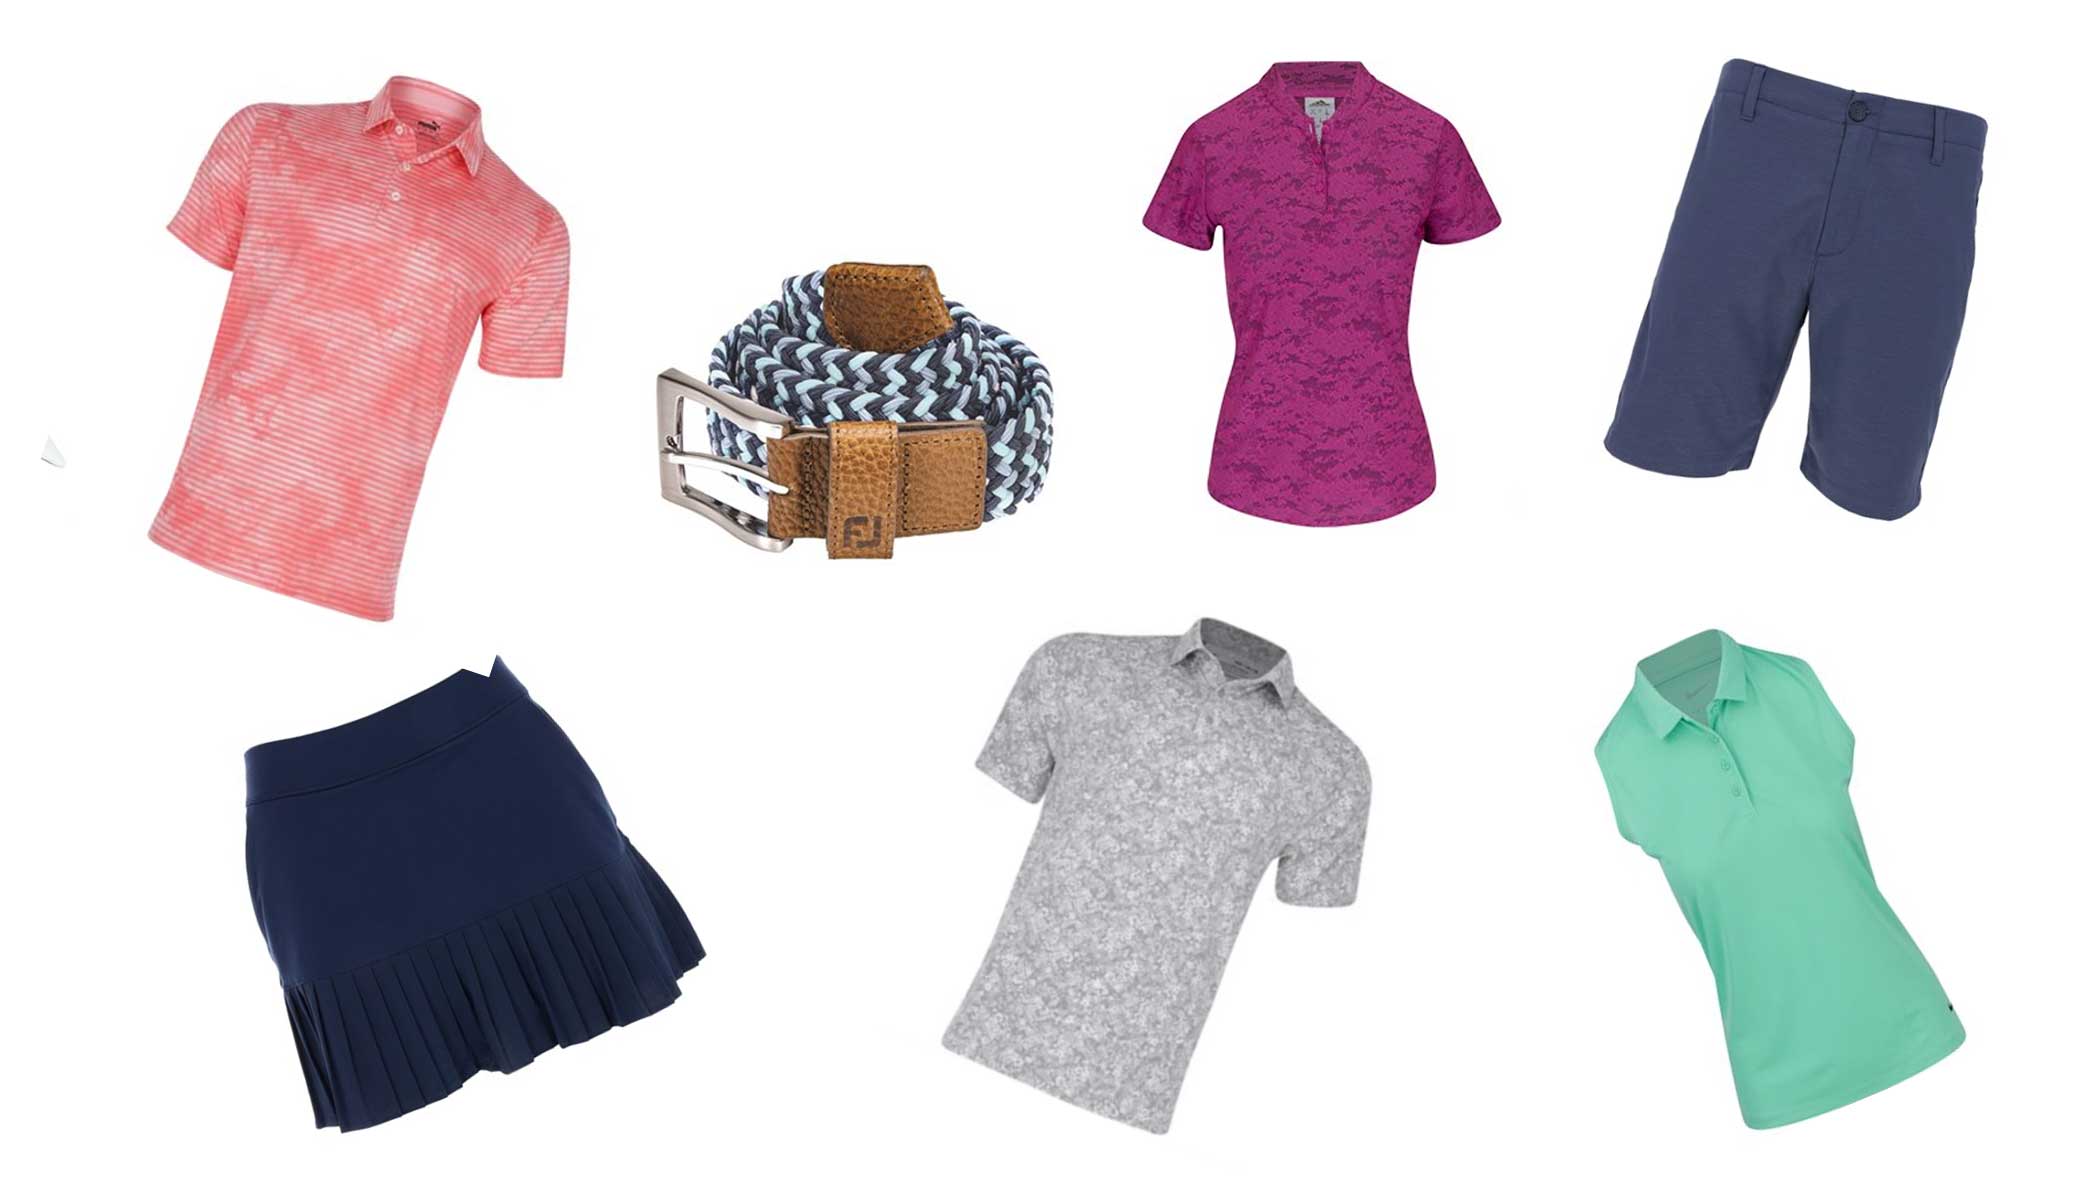 Must-have men’s and women’s golf apparel for this season